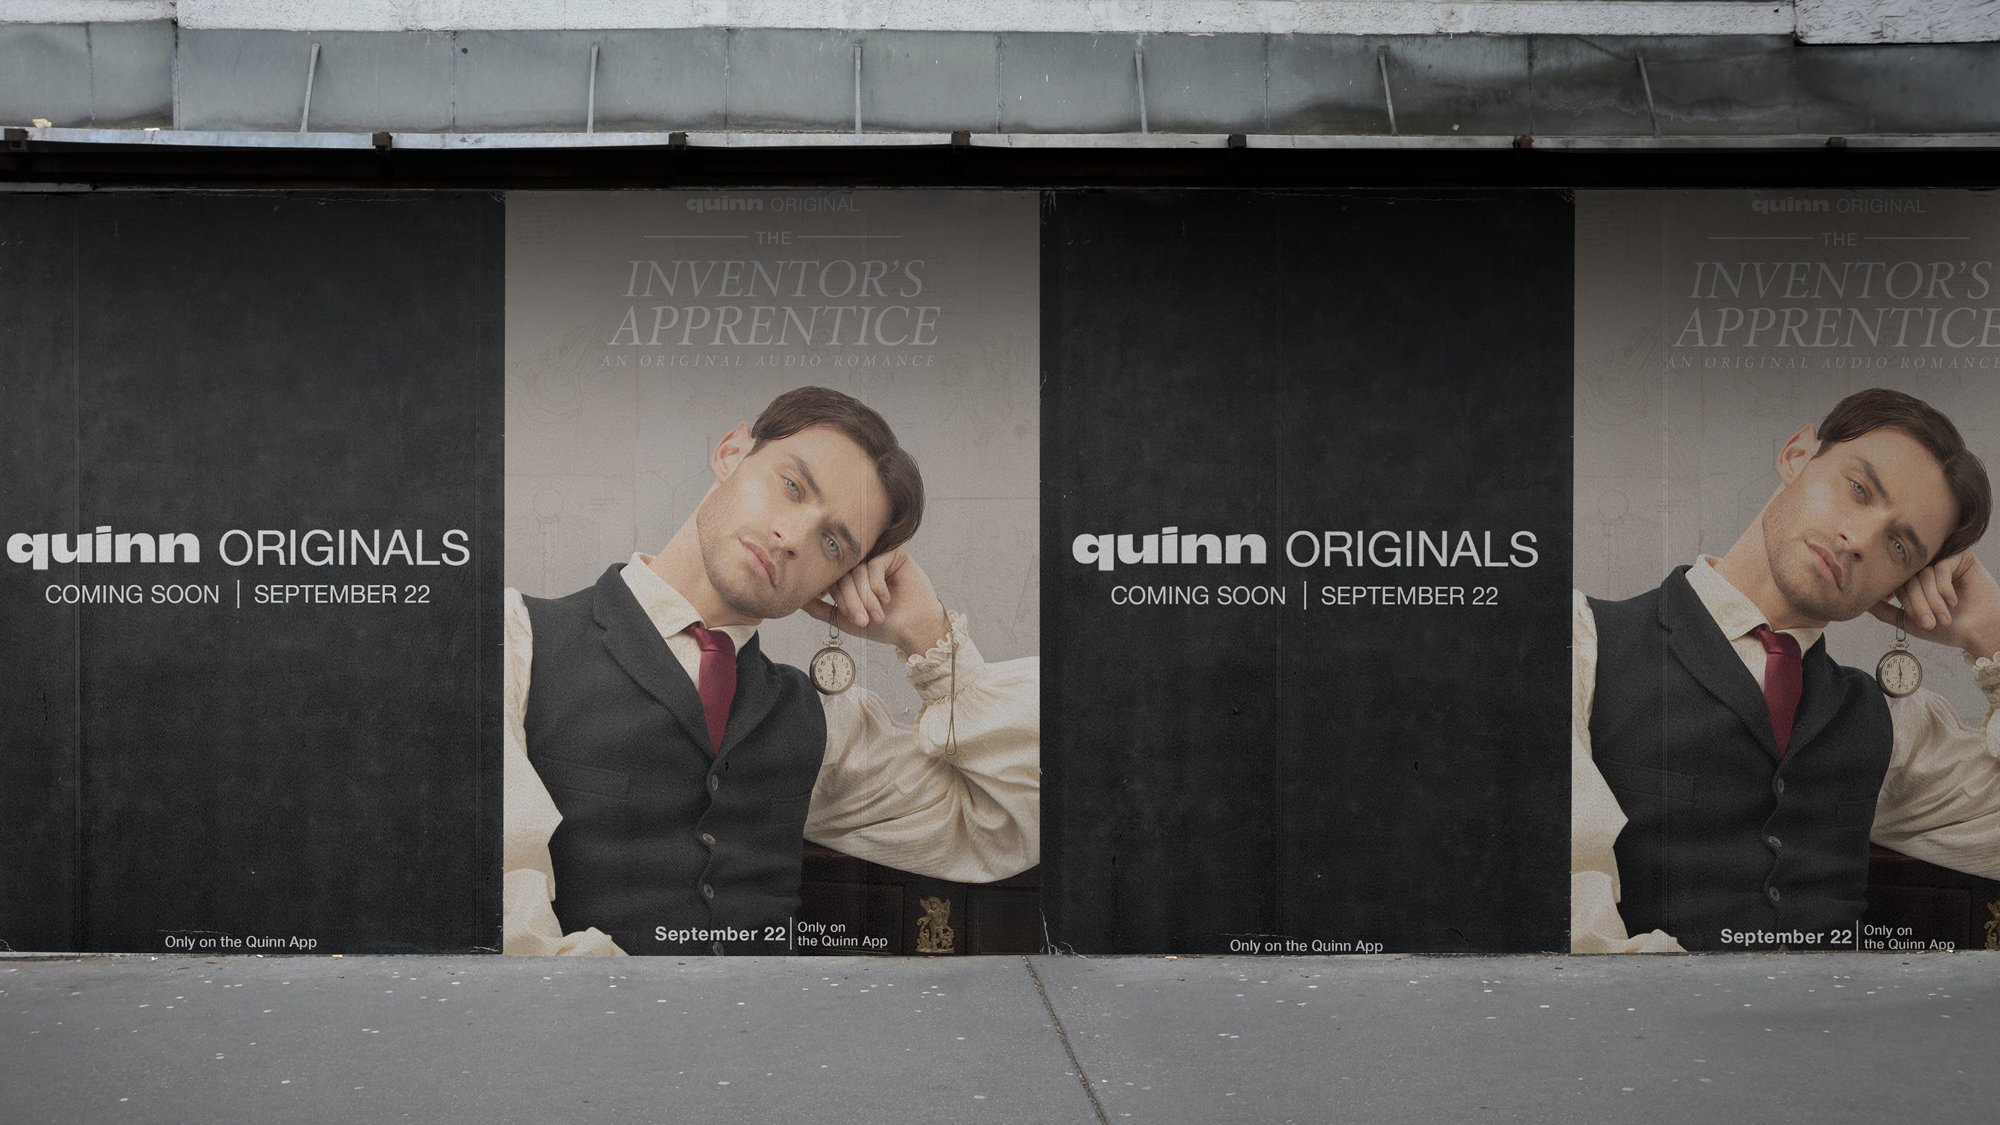 Billboards for a Quinn Original audio that alternates between the launch date and Thomas Doherty in a dressy blazer and tie with a clock